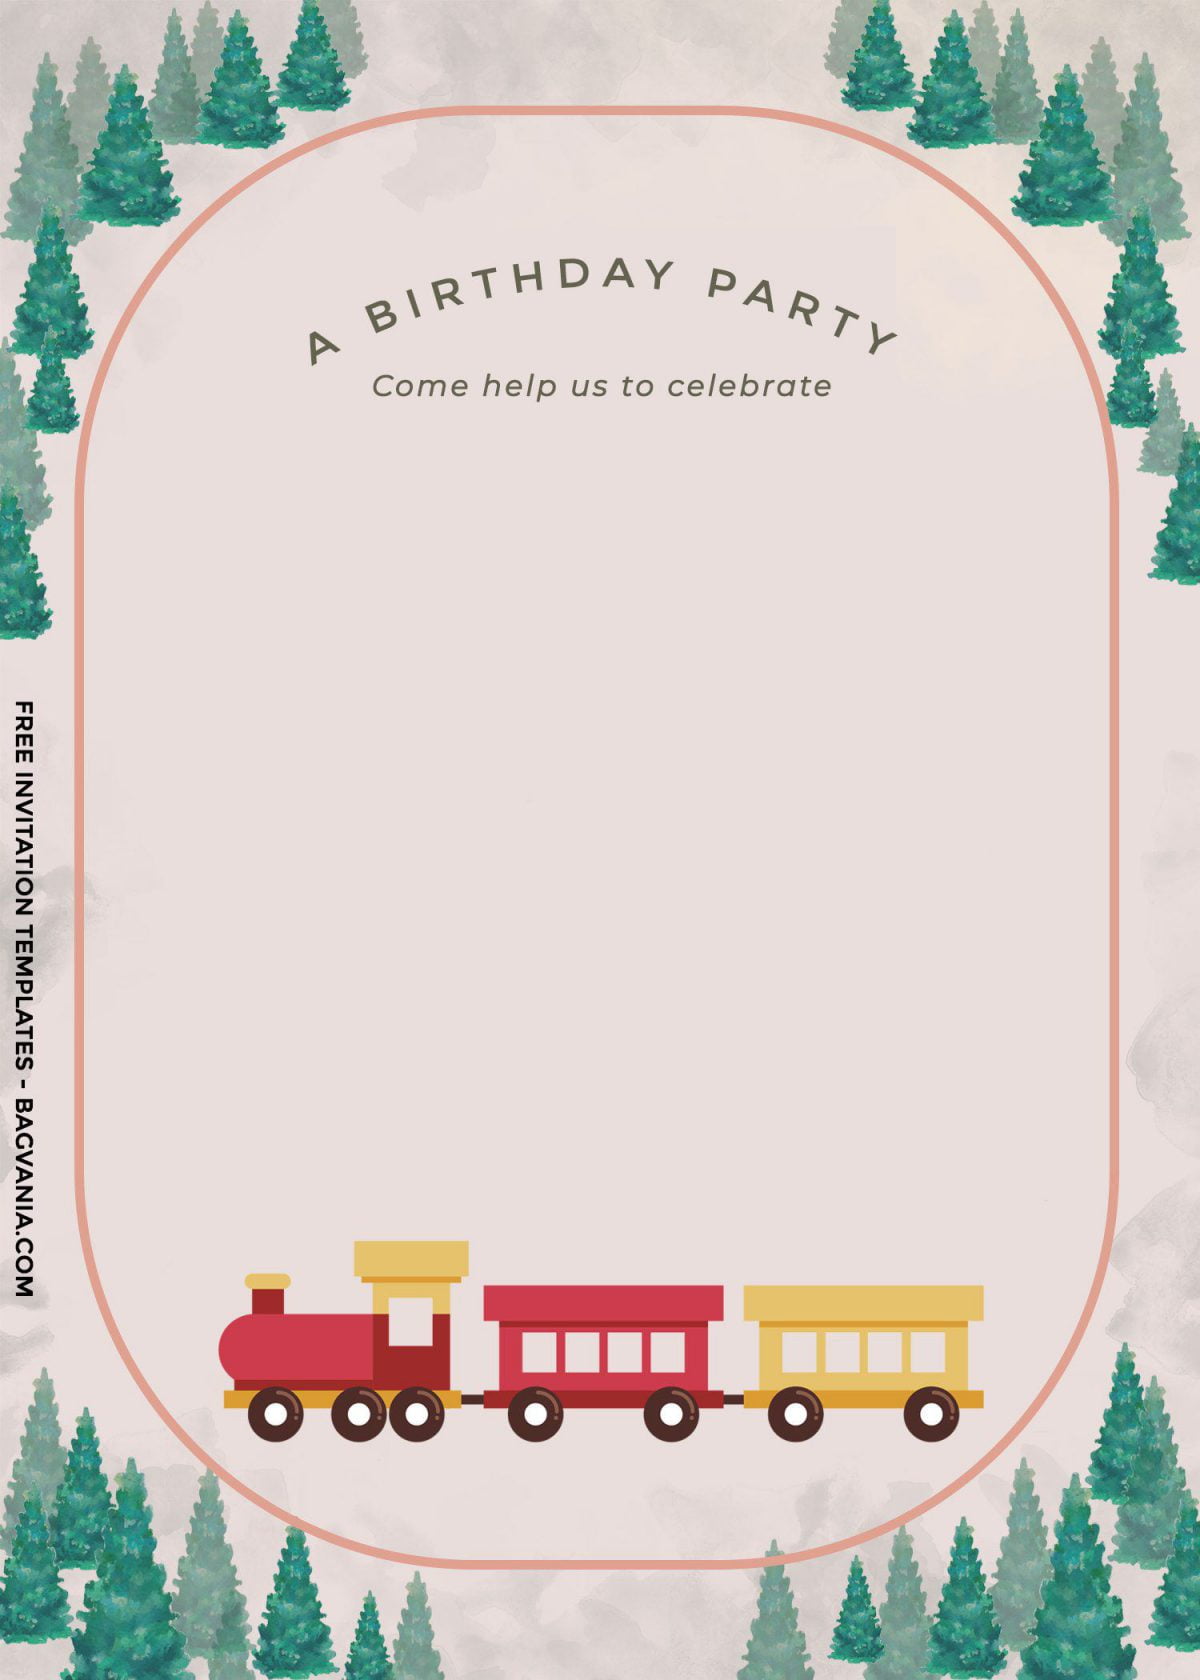 8+ Cute Vintage Train Themed Birthday Invitation Templates and has Vintage train in the forest